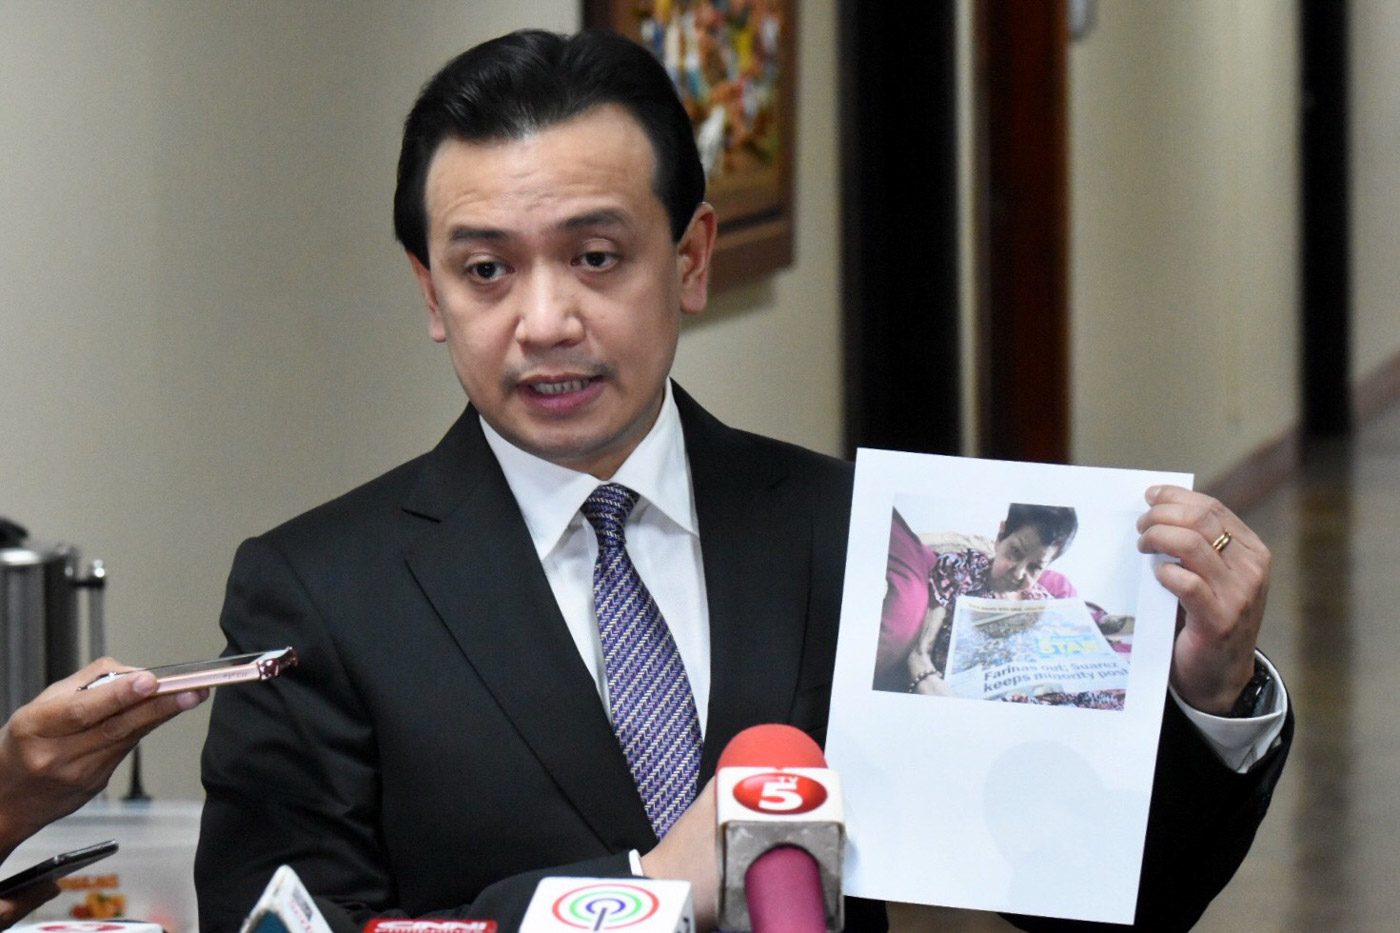 DENIALS. Senator Antonio Trillanes IV denies President Rodrigo Duterte's allegations. Here he is showing the photo of his 84-year-old mother, after being implicated by the President. Photo by Angie de Silva/Rappler  